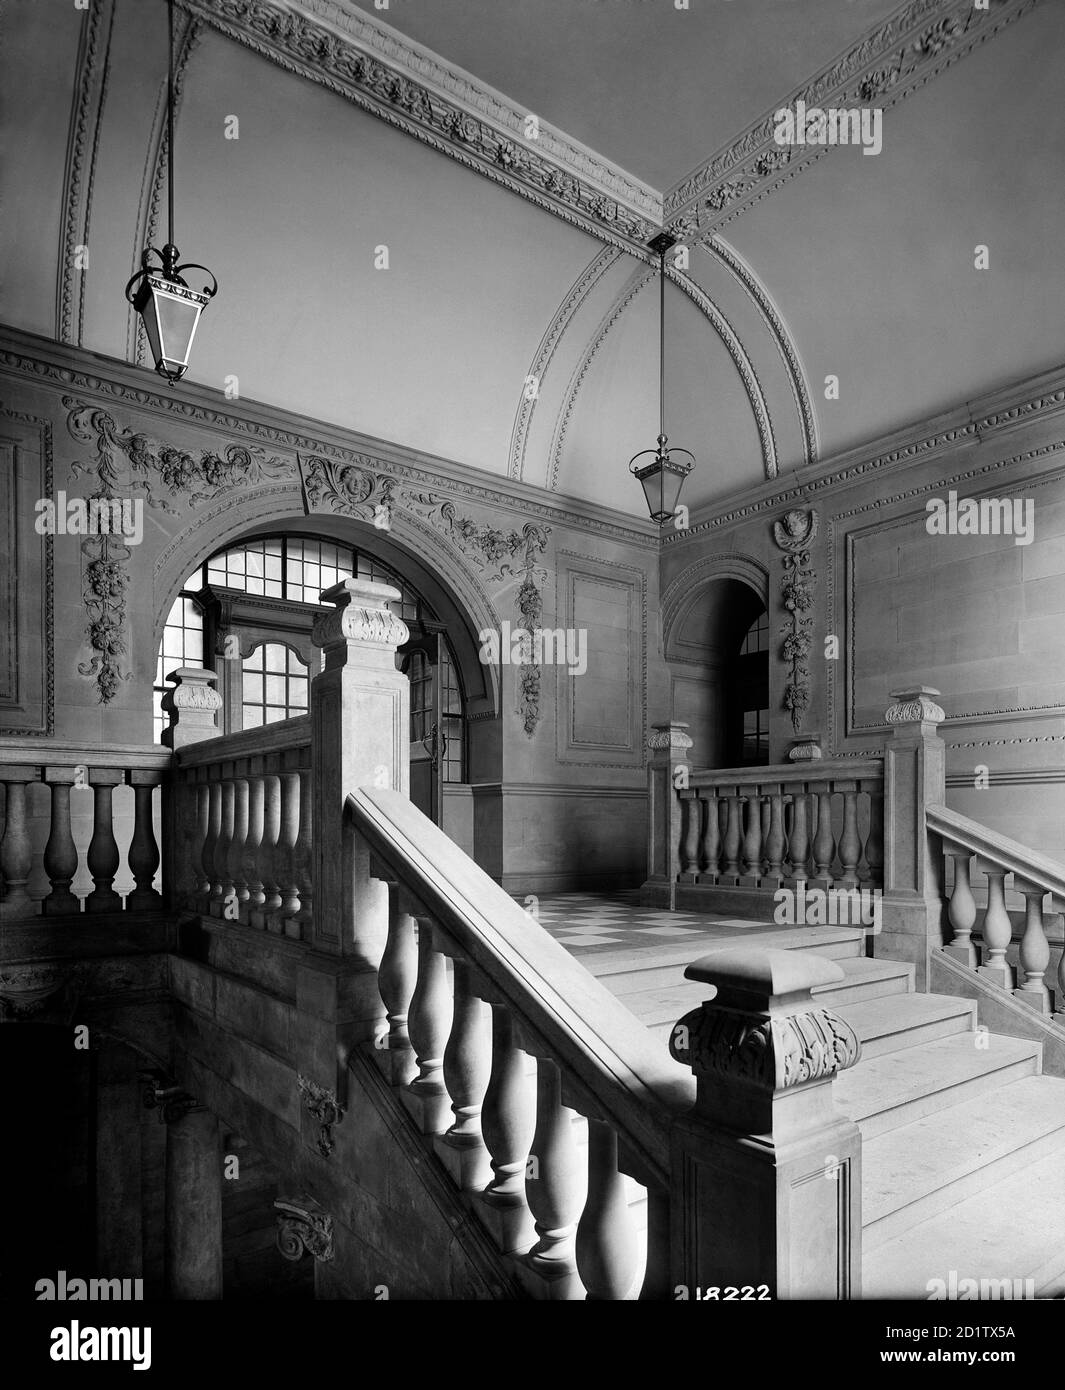 SESSIONS HOUSE, Lancaster Road, Preston, Lancashire. The interior of the County Sessions House showing the staircase and entrance. The court house was built between 1900 and 1903 to the designs of Henry Littler, the County architect, in an Edwardian Baroque style. The Bedford Lemere daybook records Goodall, Lamb and Heighway as clients. Photographed by H Bedford Lemere in 1904. Stock Photo